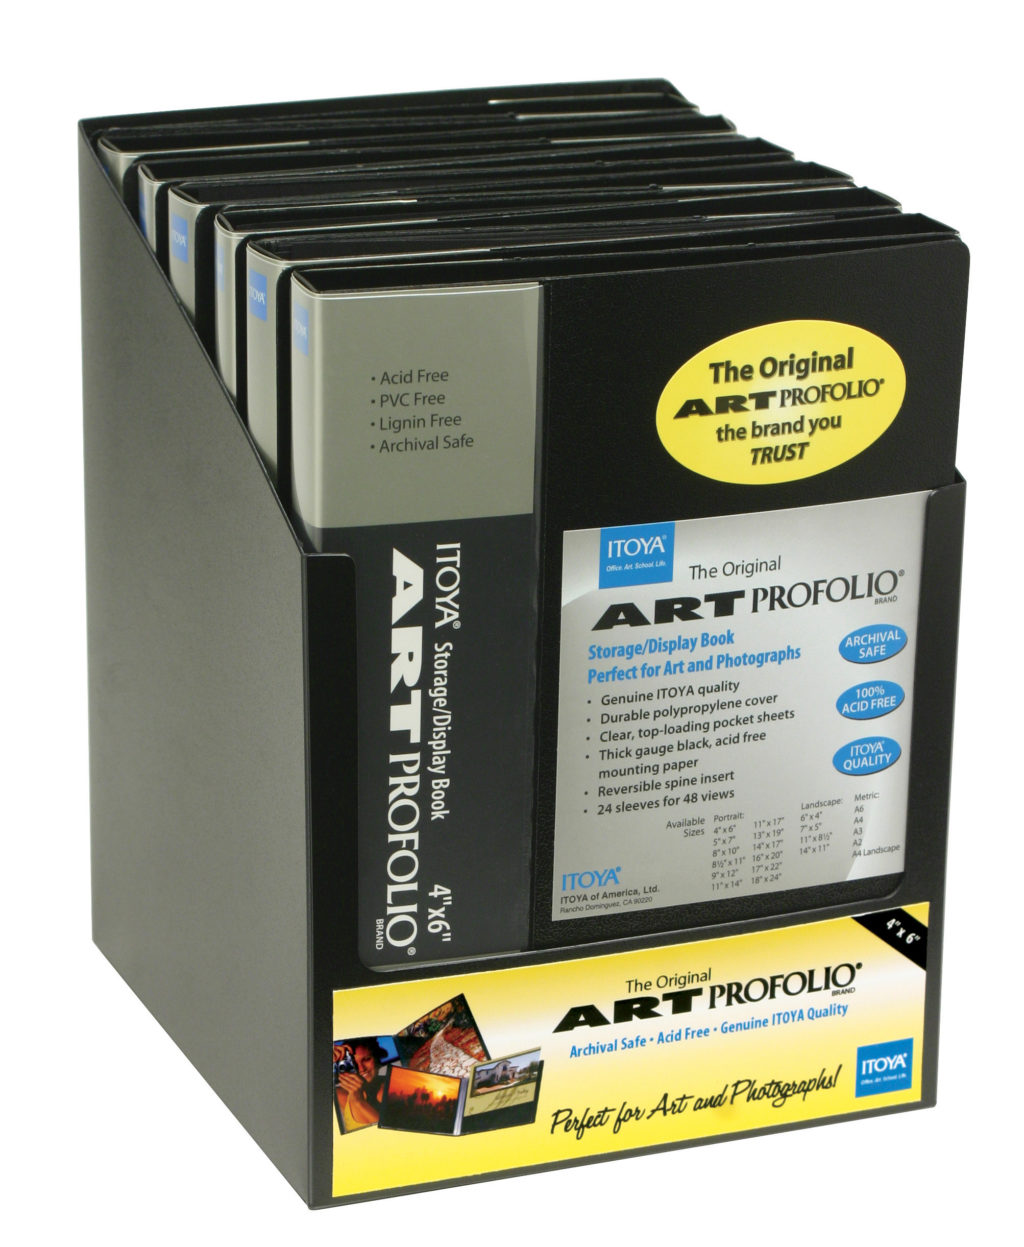 90 Pages Pack of 2 Itoya Art Profolio Storage/Display Book 8 1/2 in x 11 in. 